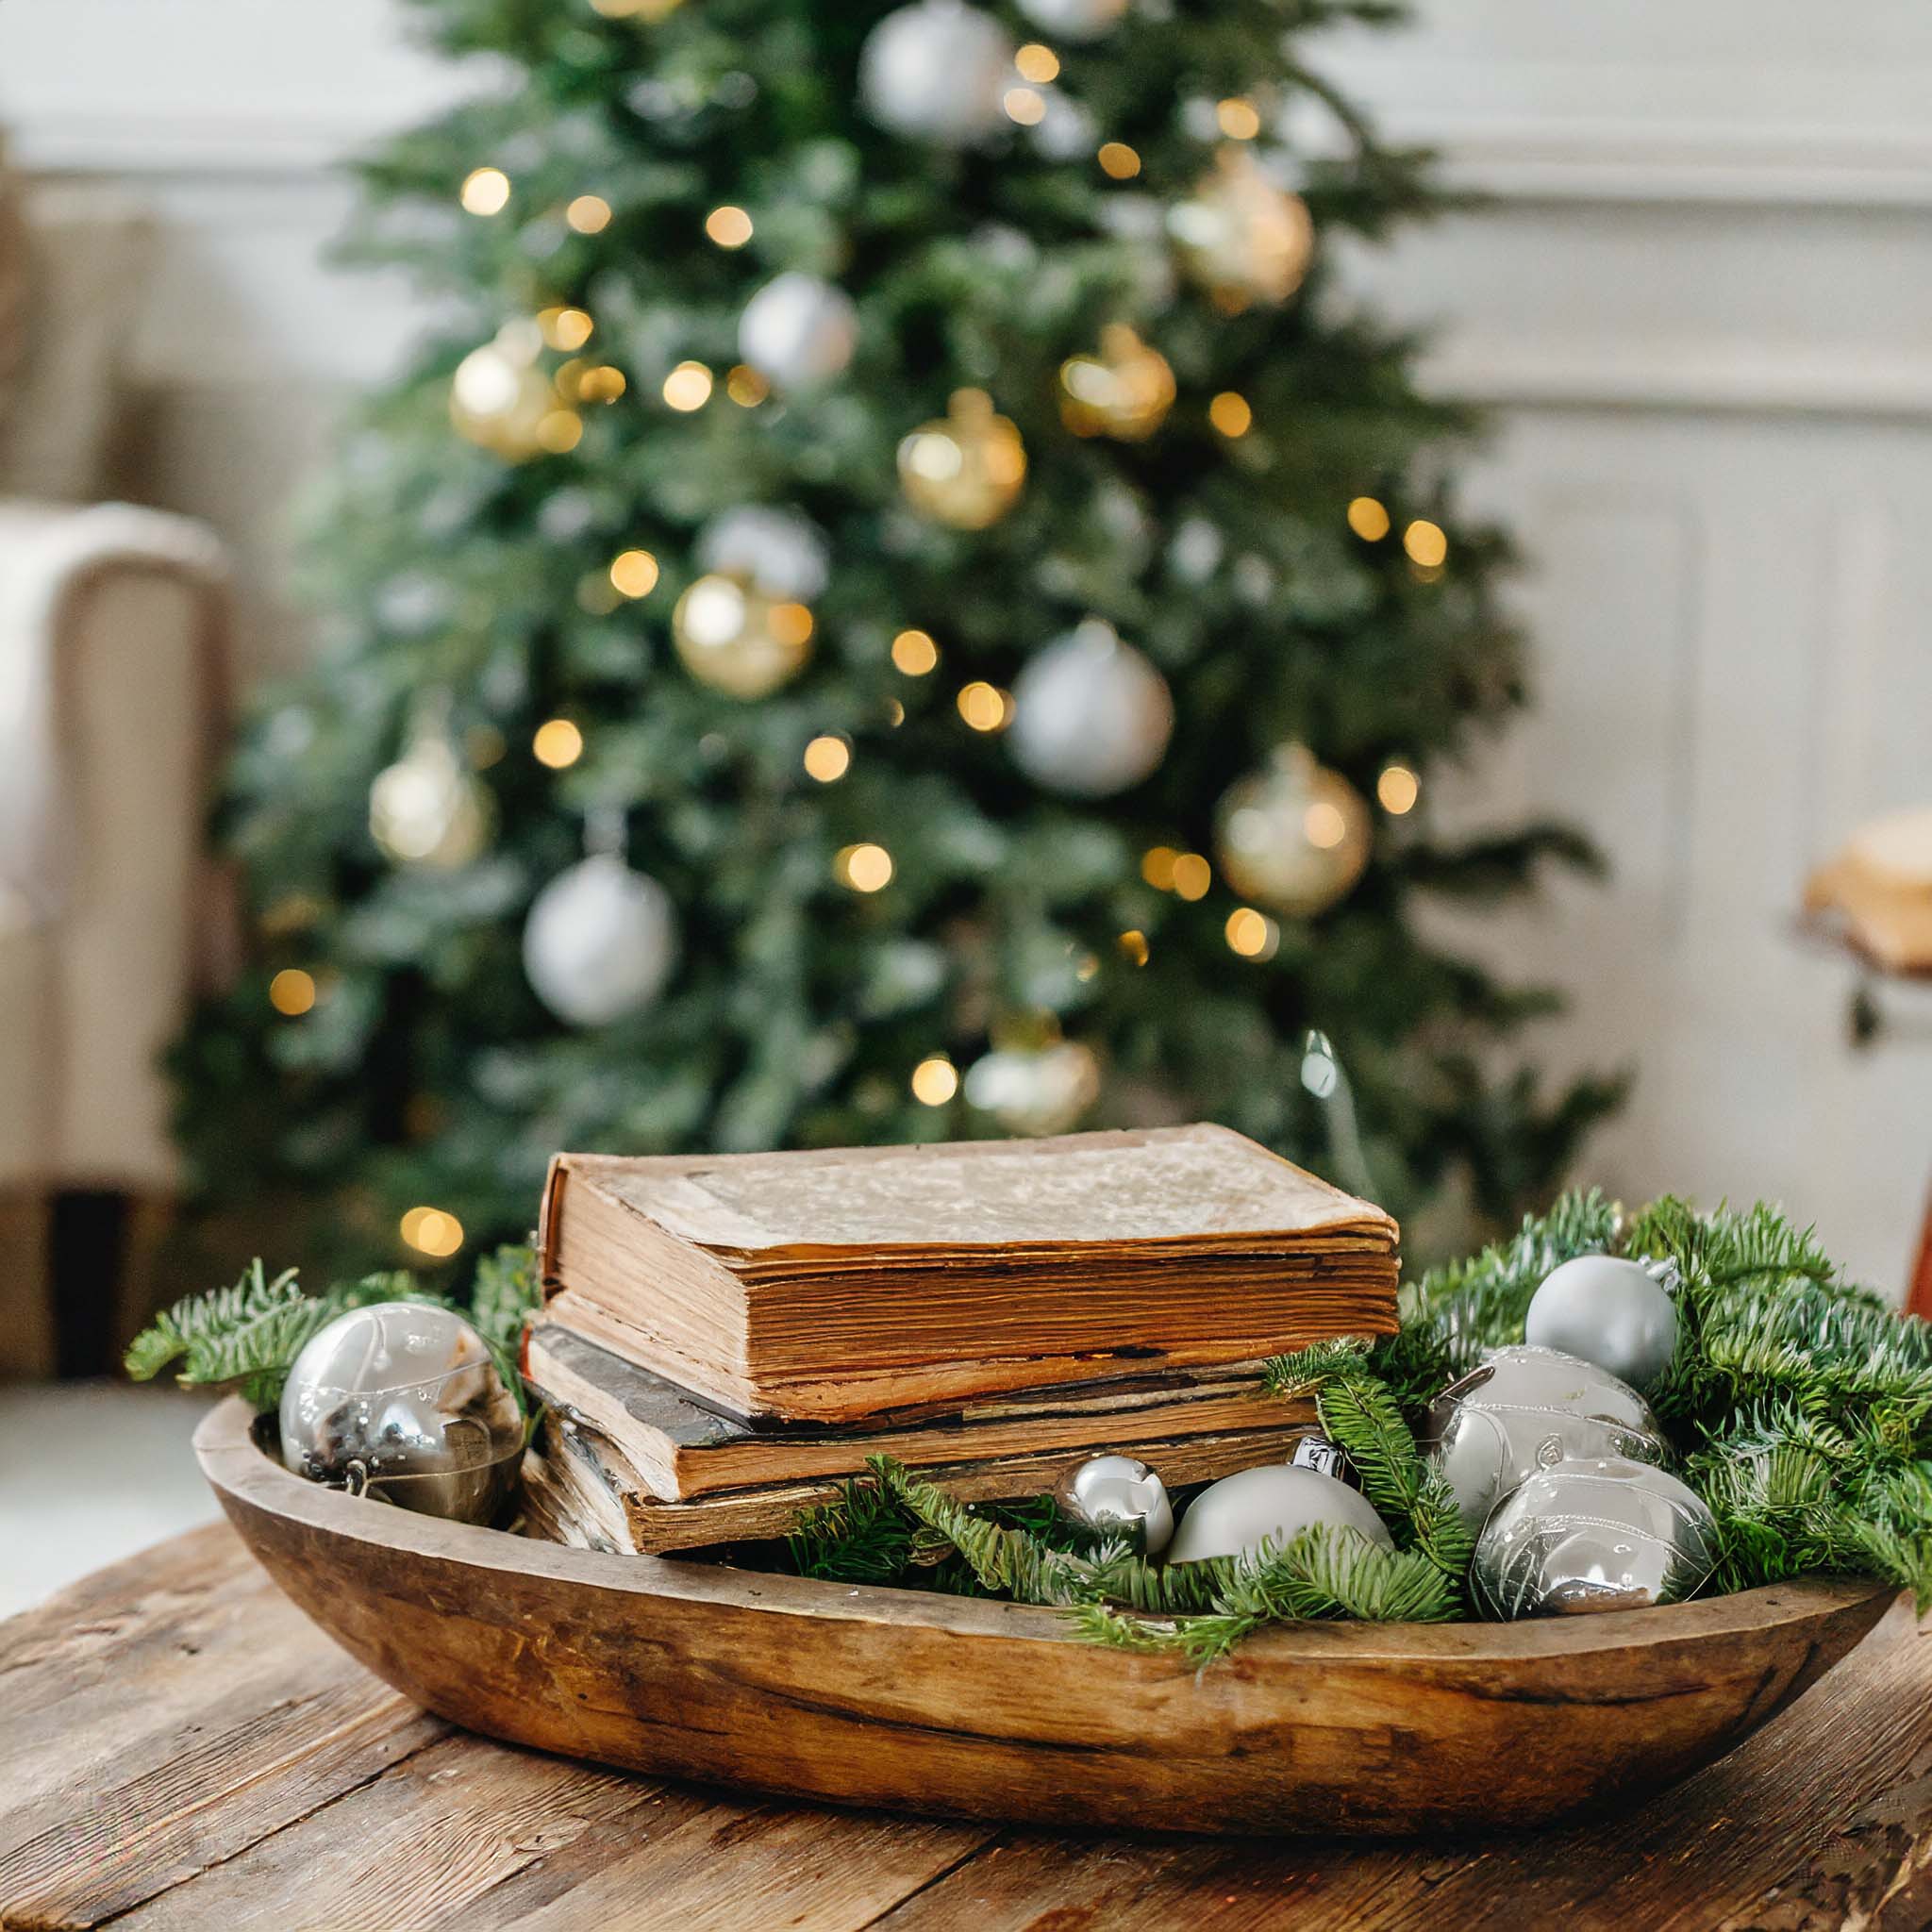 https://parkergibbs.com/cdn/shop/files/wooden-dough-bowl-christmas-filled-with-vintage-books-ornaments-greenery.jpg?v=1700580773&width=3840